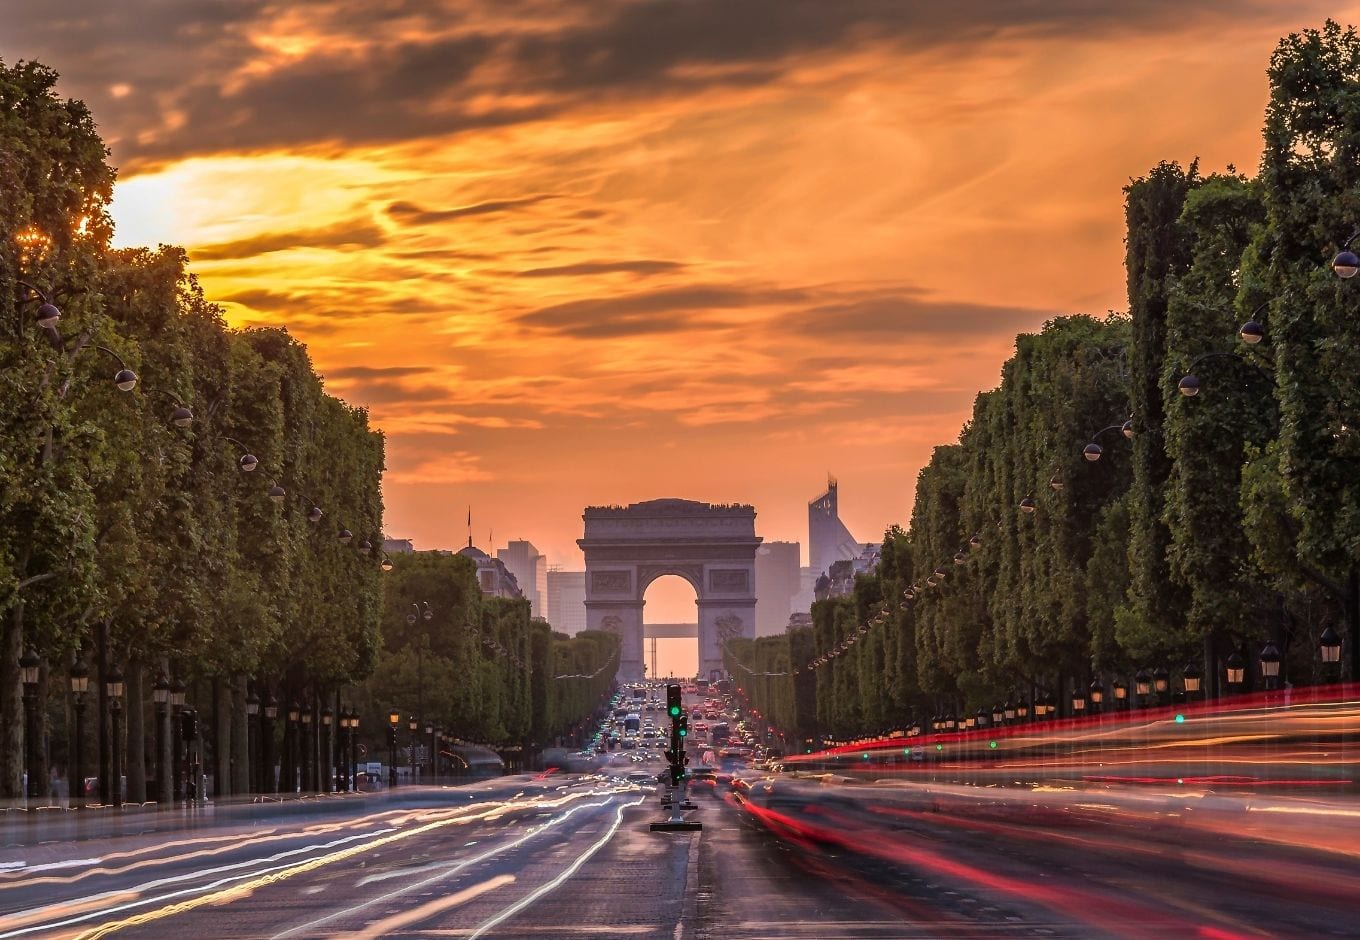 The Arc Du Triomphe at the end of the Champs Élysees Avenue at  sunset in Paris.